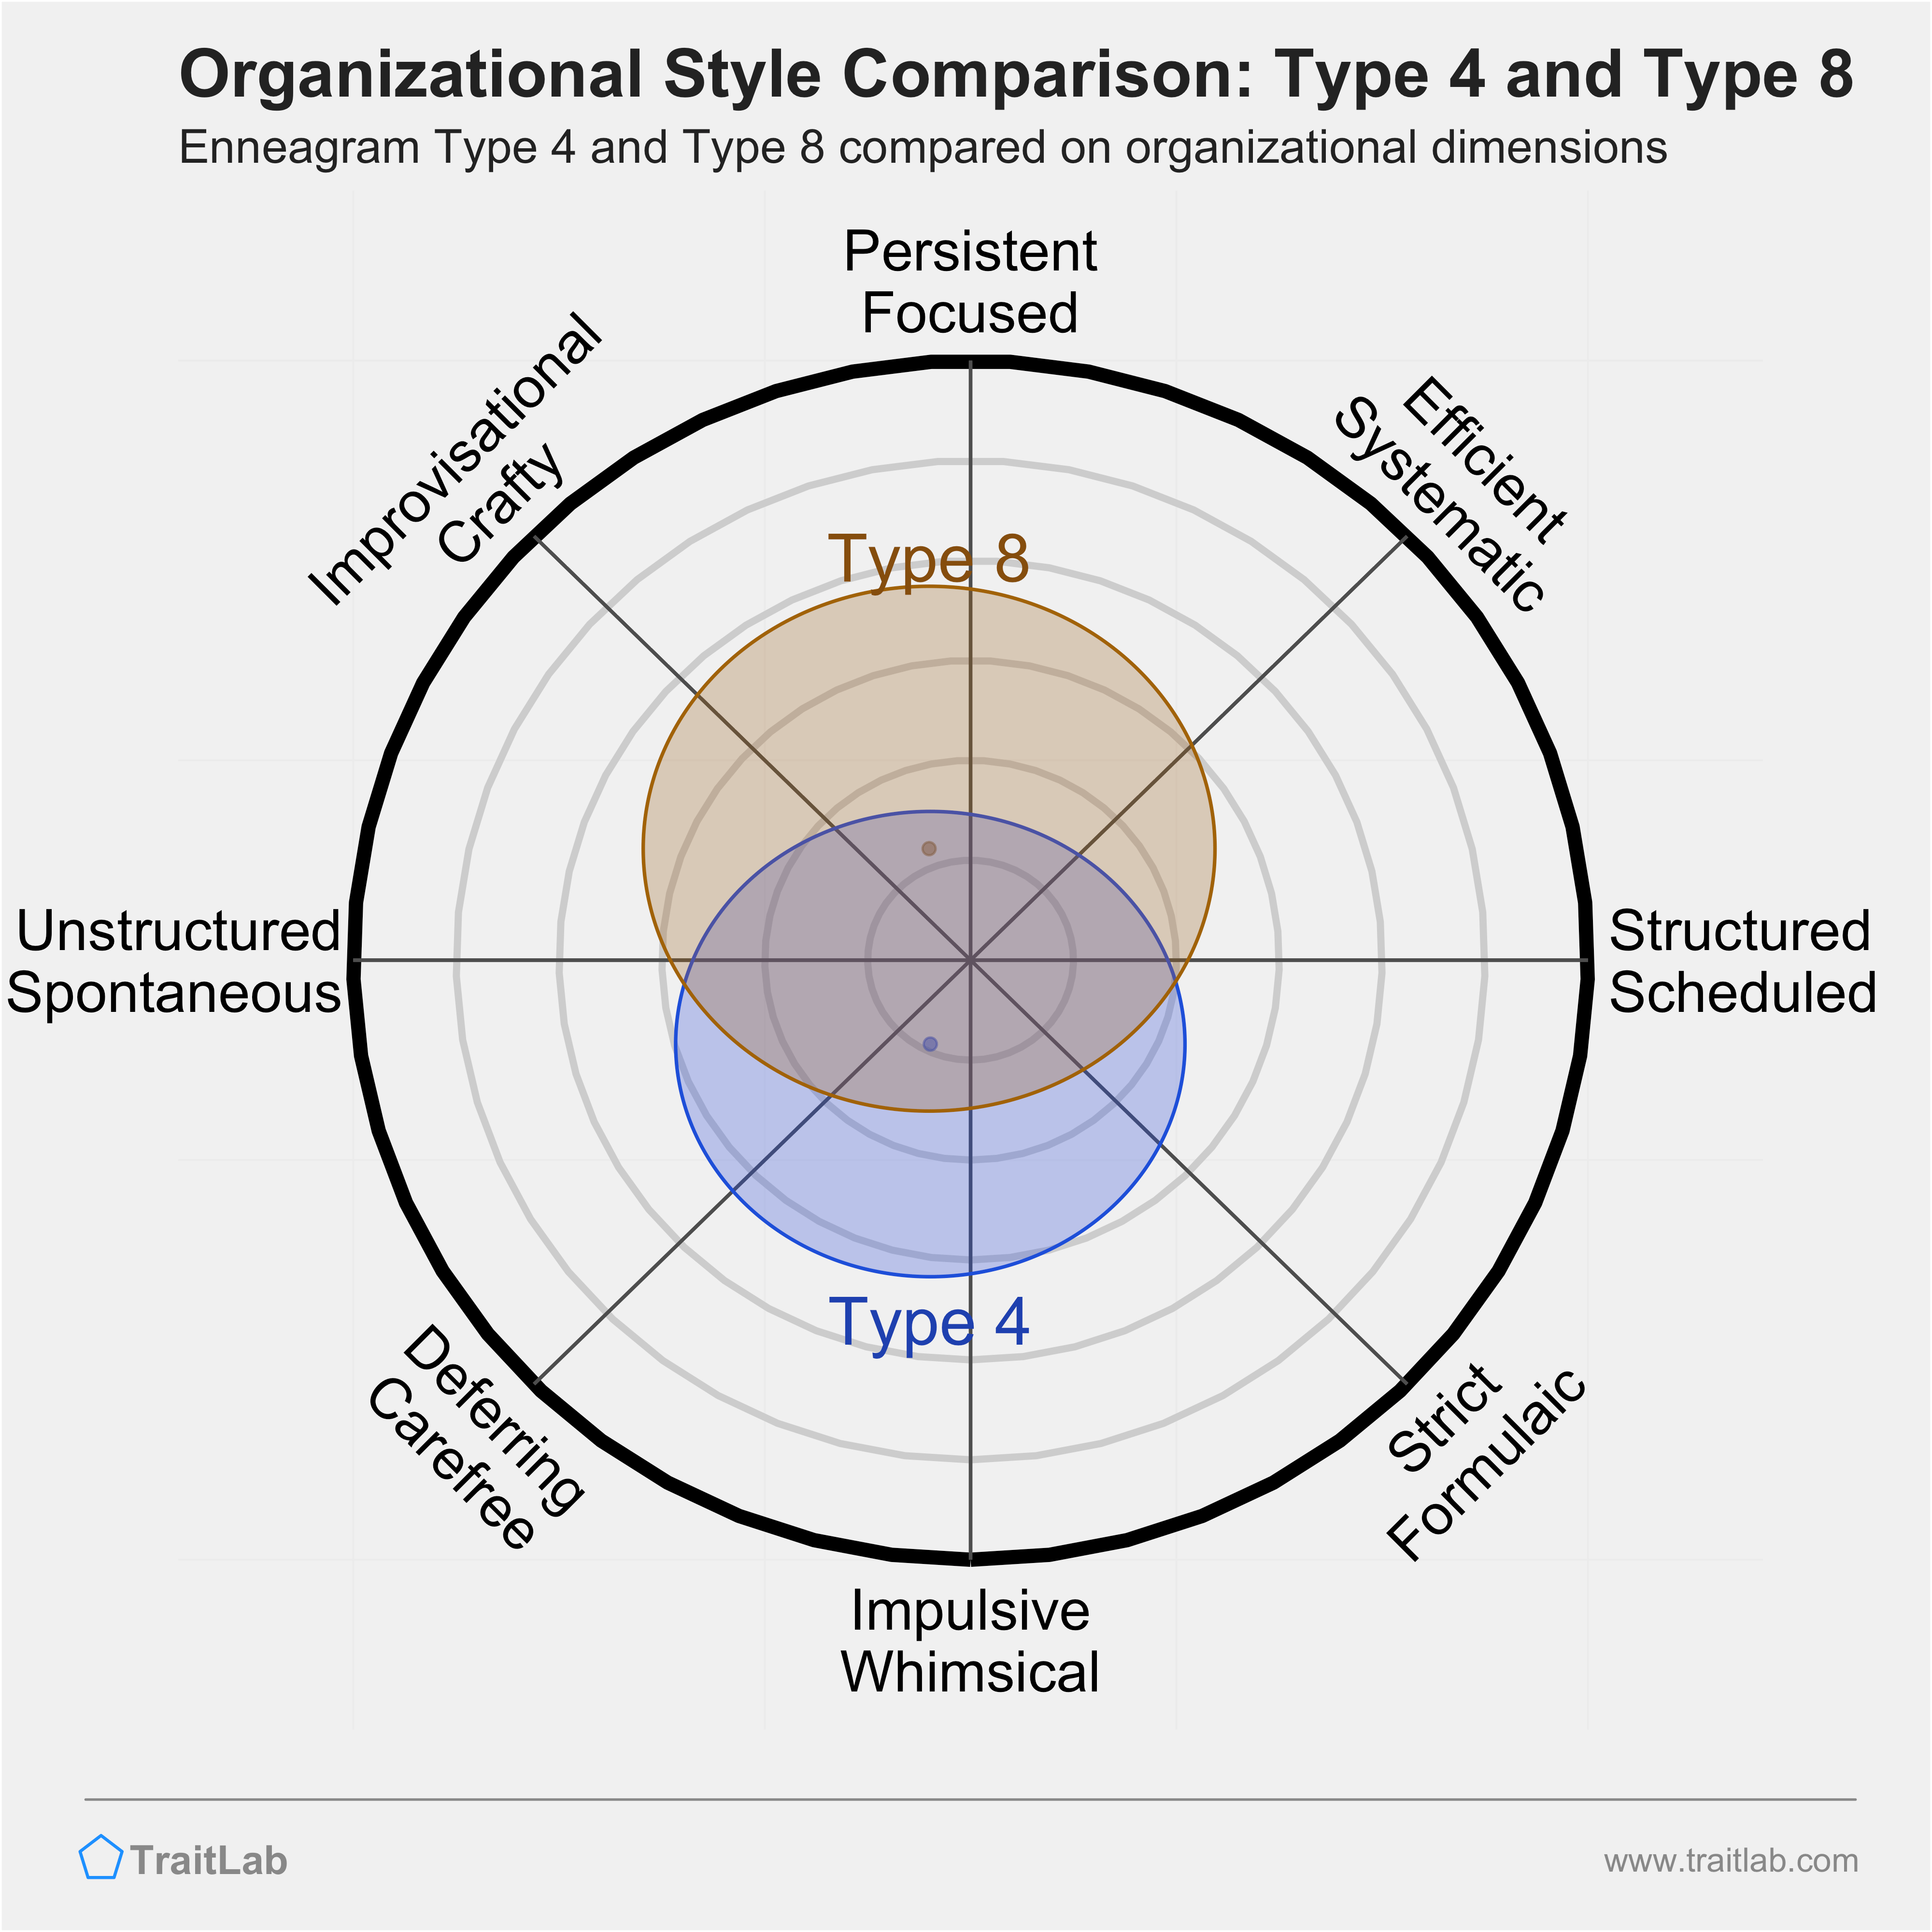 Type 4 and Type 8 comparison across organizational dimensions